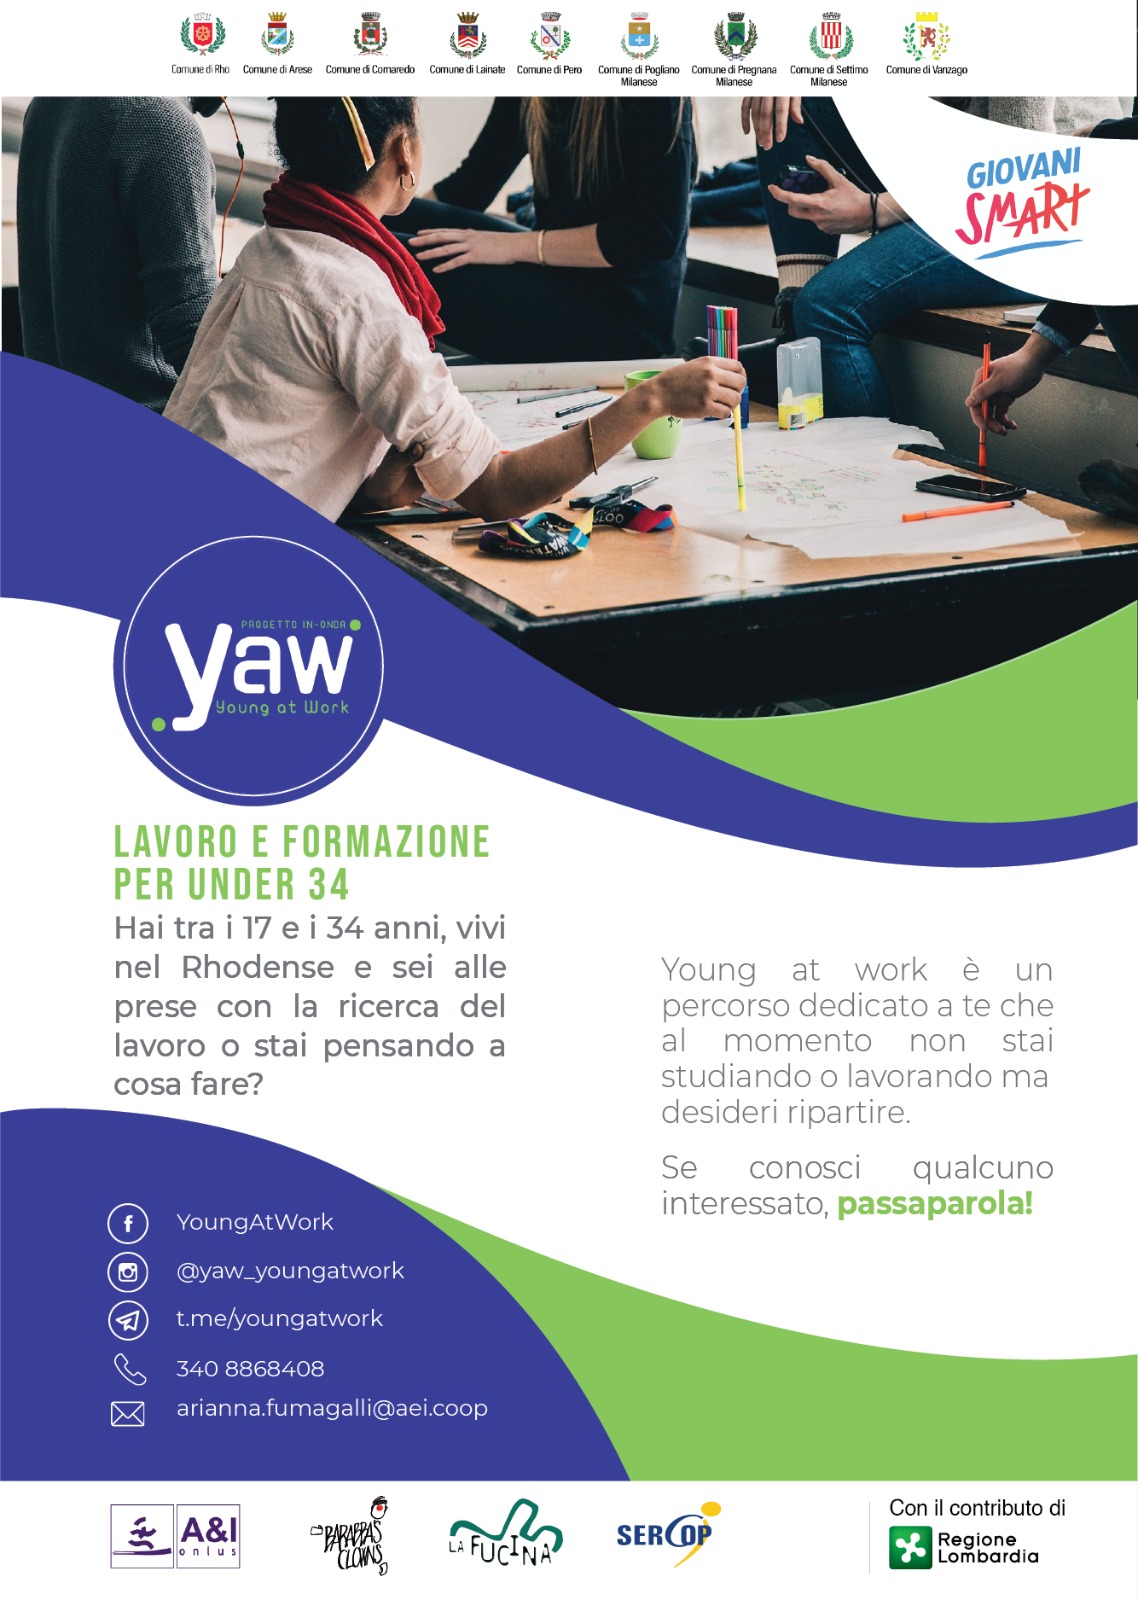 YAW – Young at work